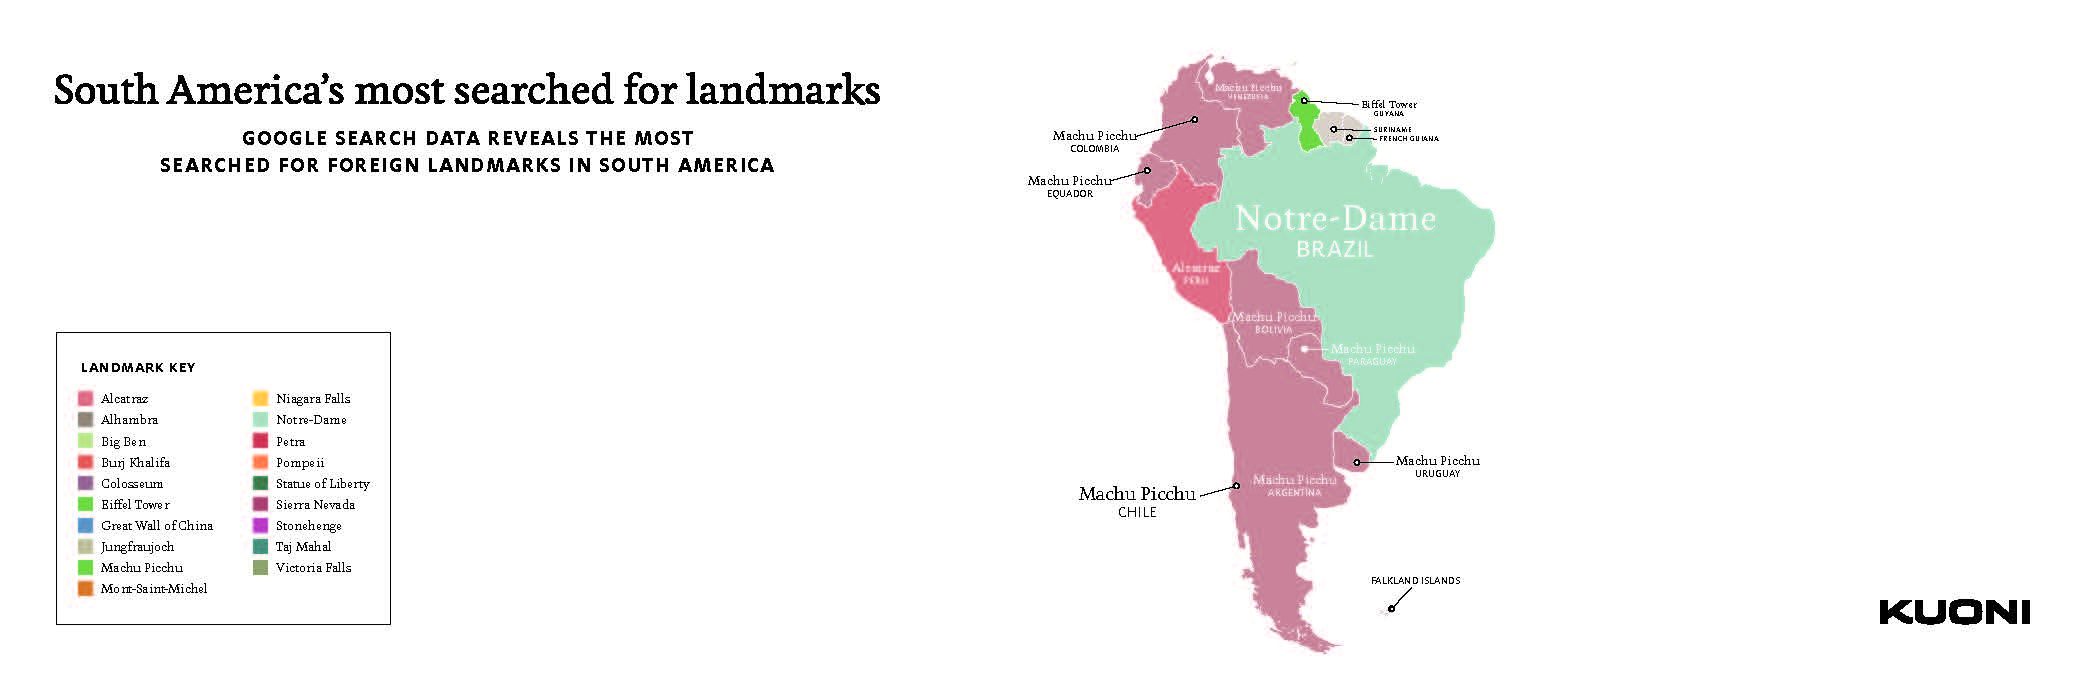 South America's Most Searched For Landmarks